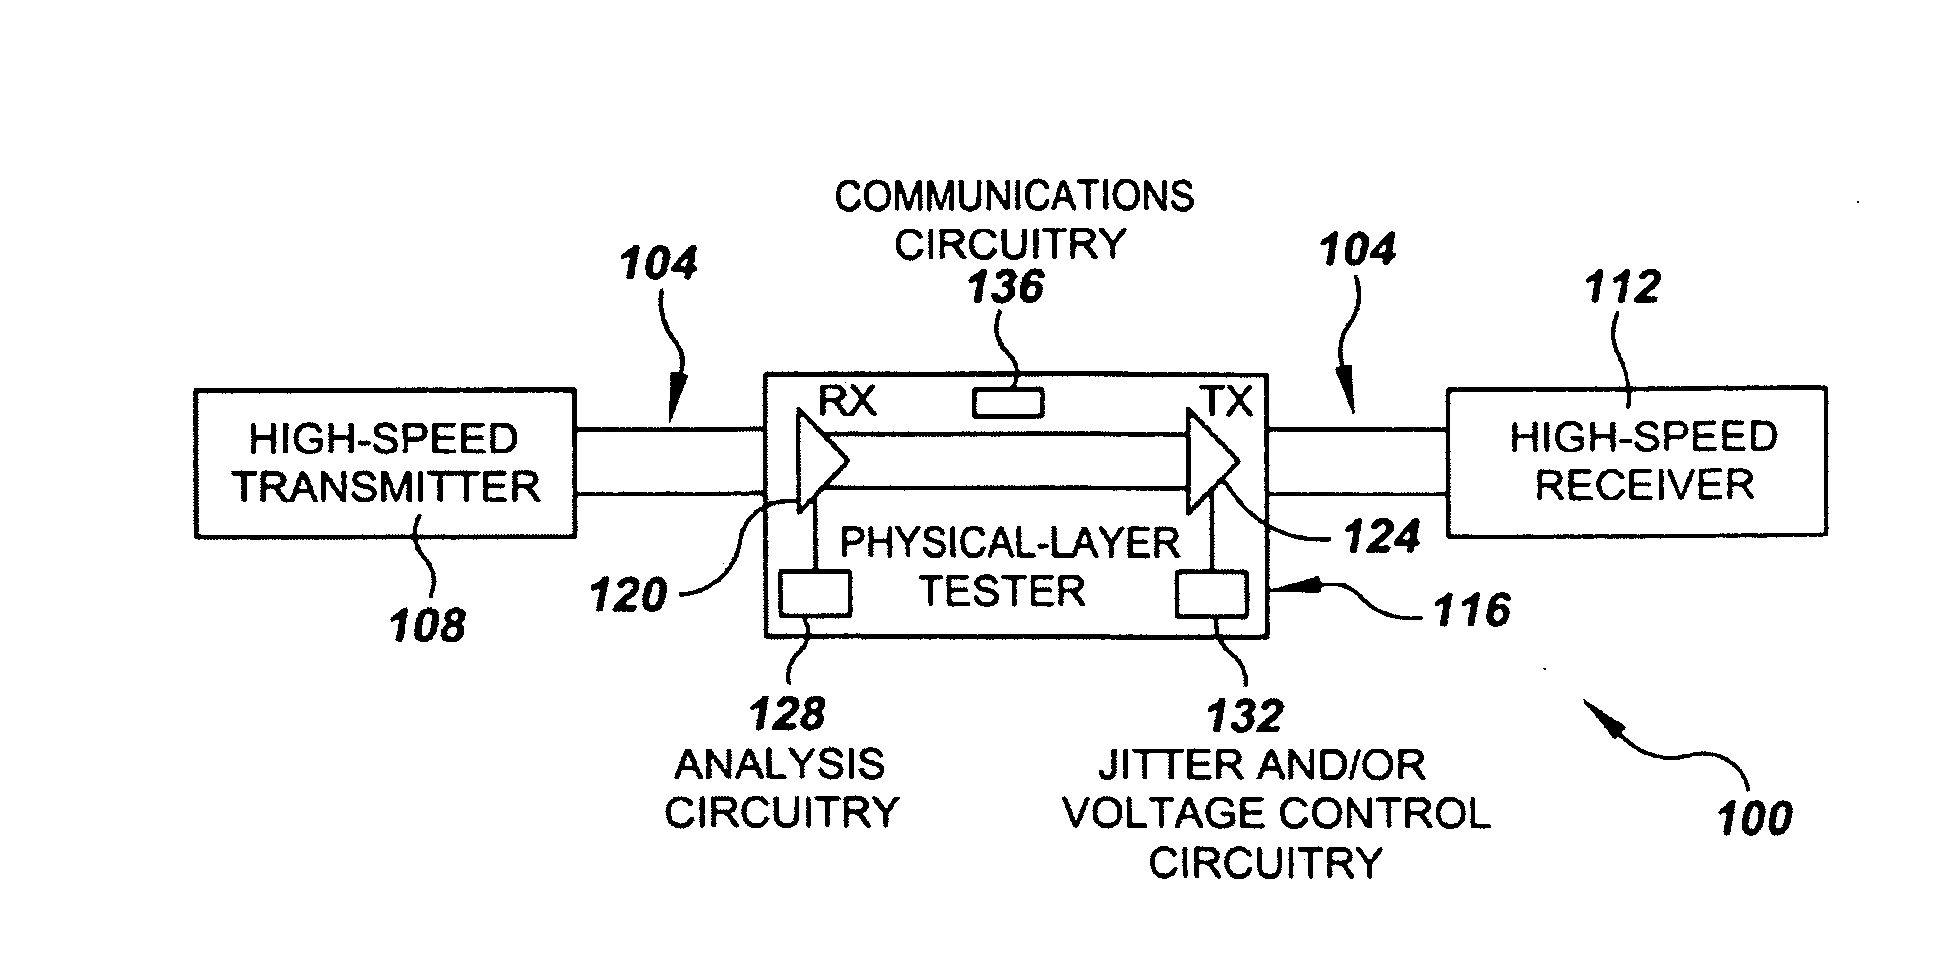 System and Method for Physical-Layer Testing of High-Speed Serial Links in their Mission Environments